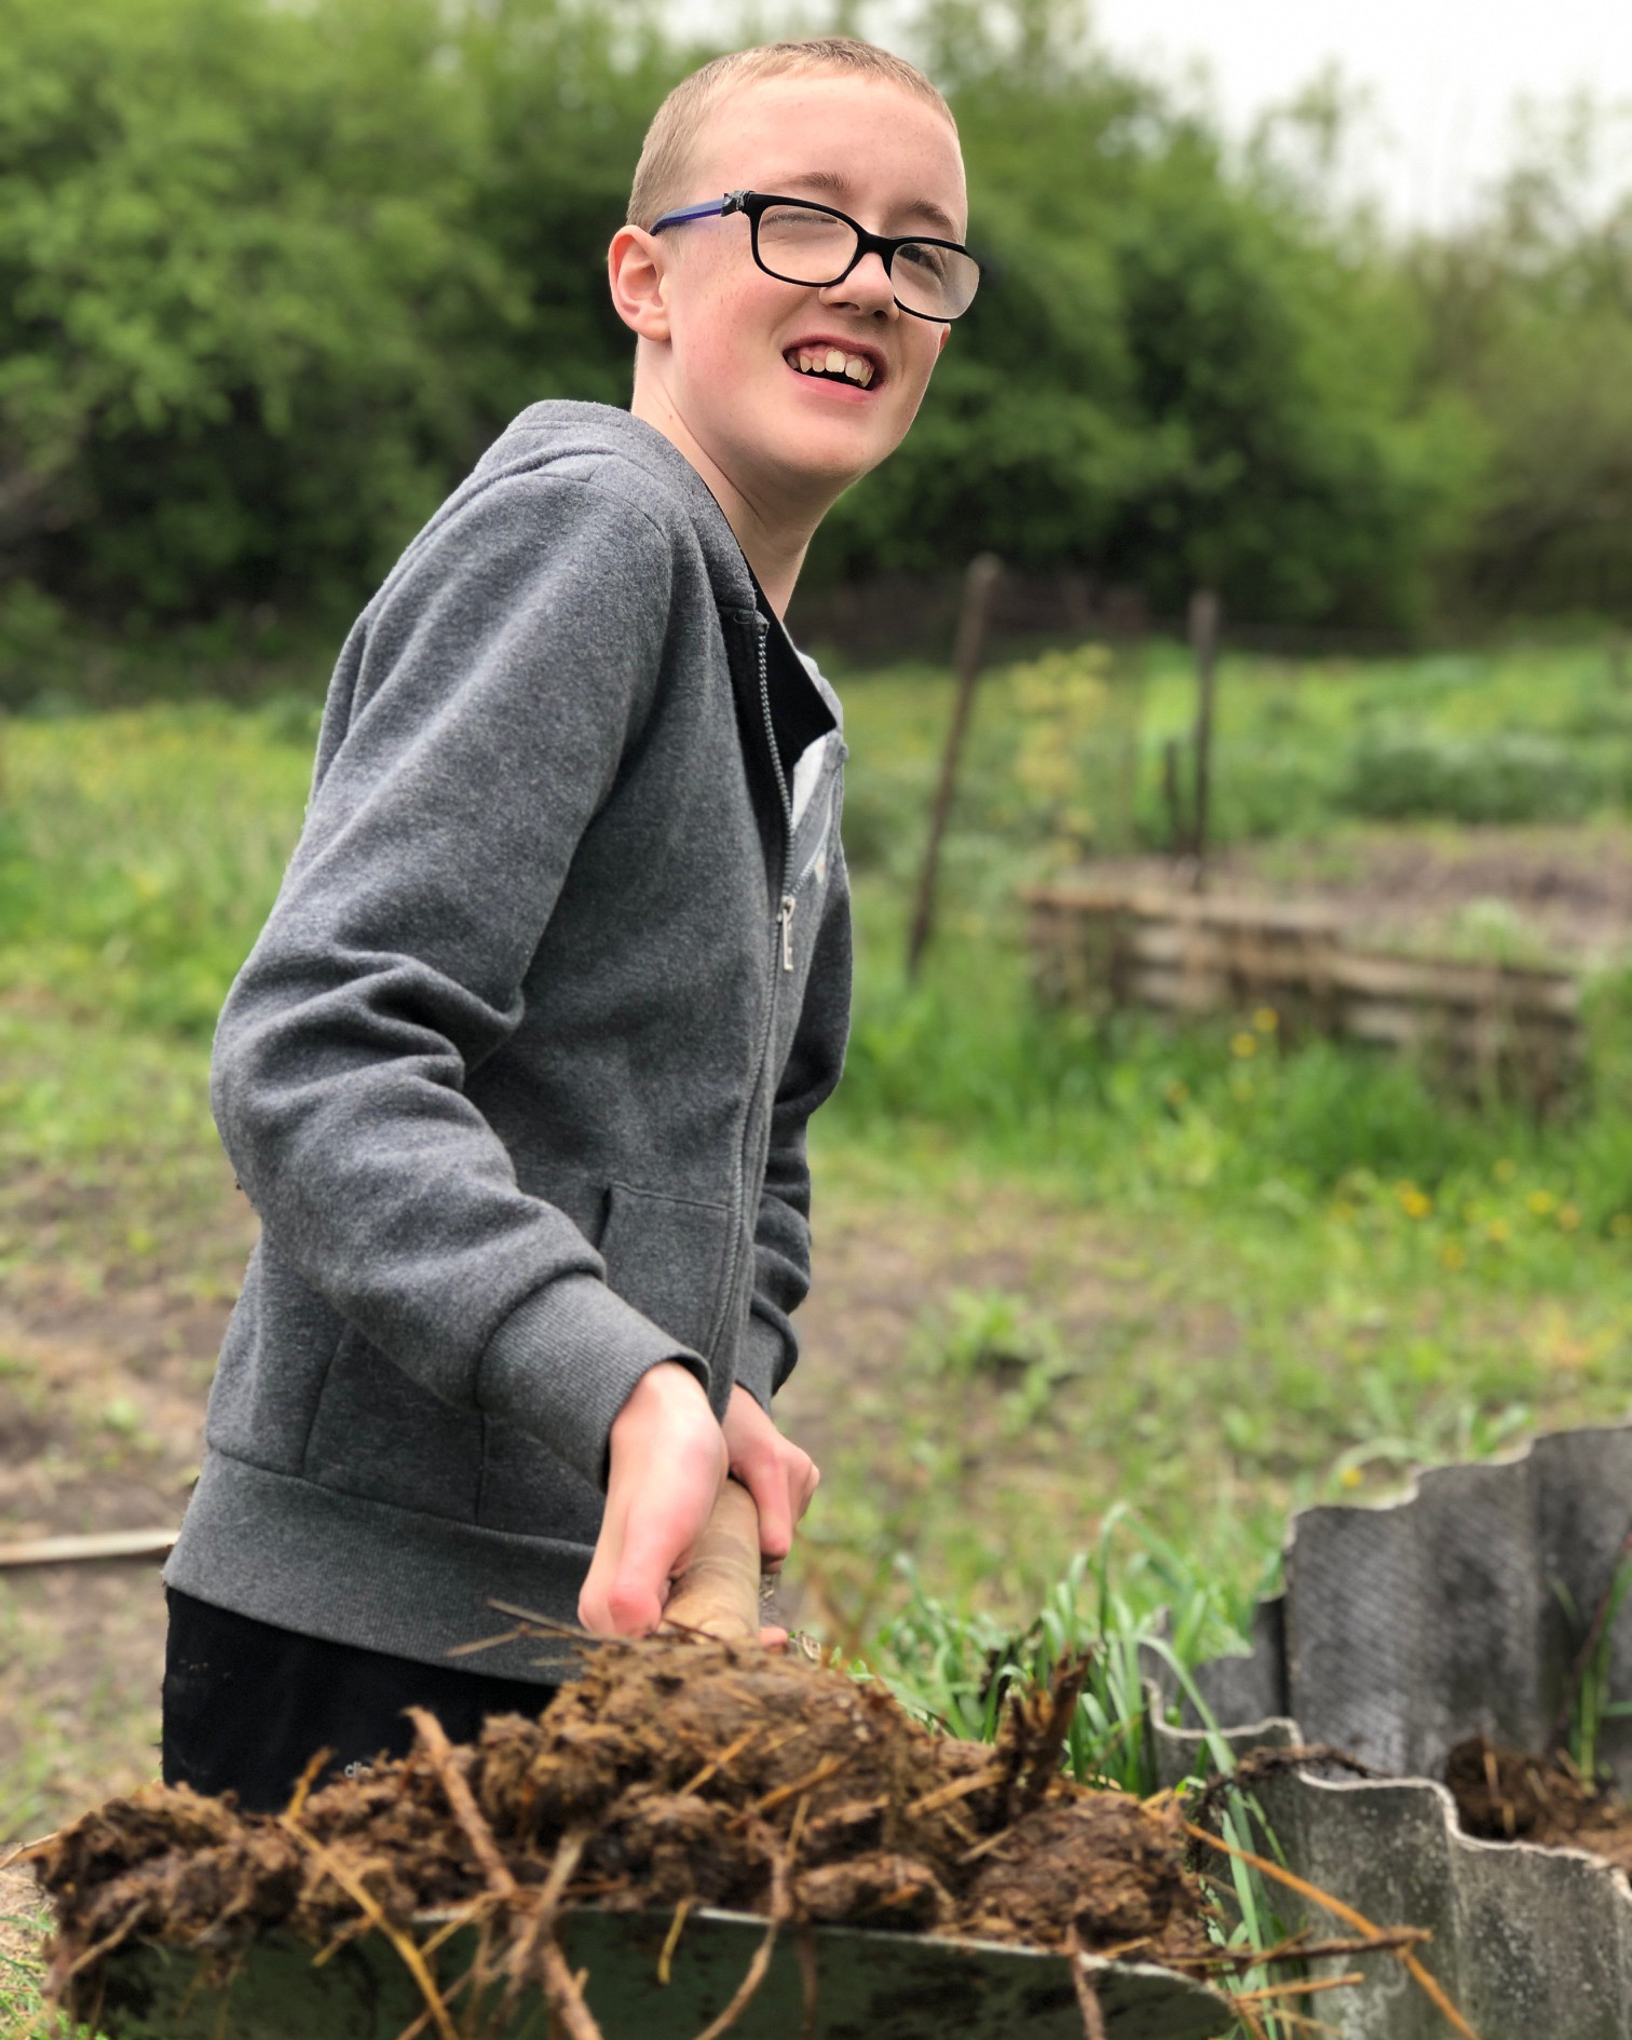 A young teenage boy in glasses and a grey sweatshirt squints as he turns and shovels compost for the family garden.